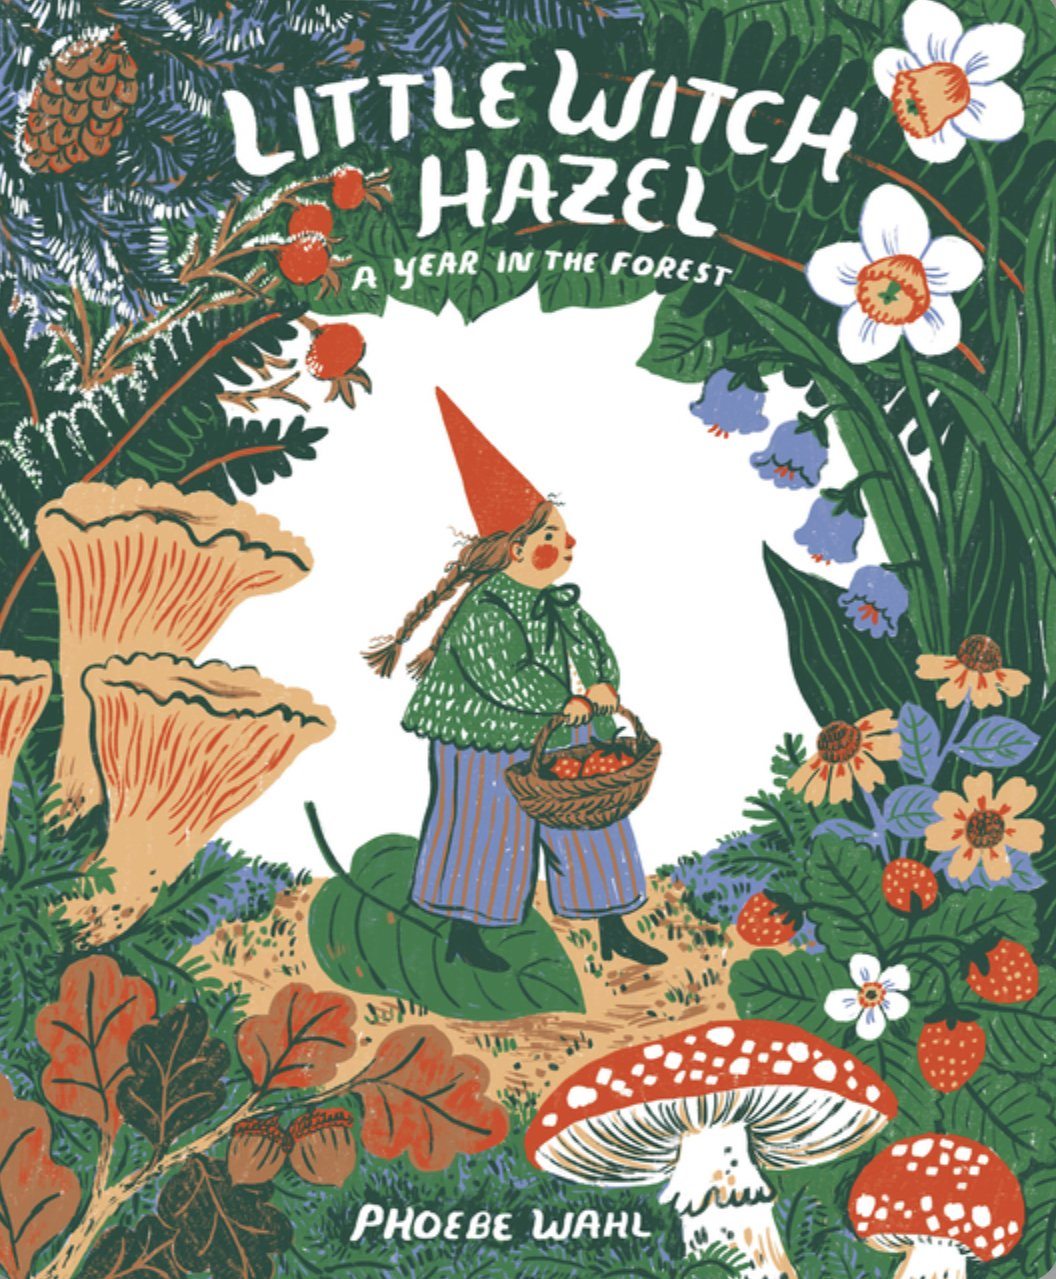 Little Witch Hazel: A Year in the Forest by Phoebe Wahl - Alder & Alouette